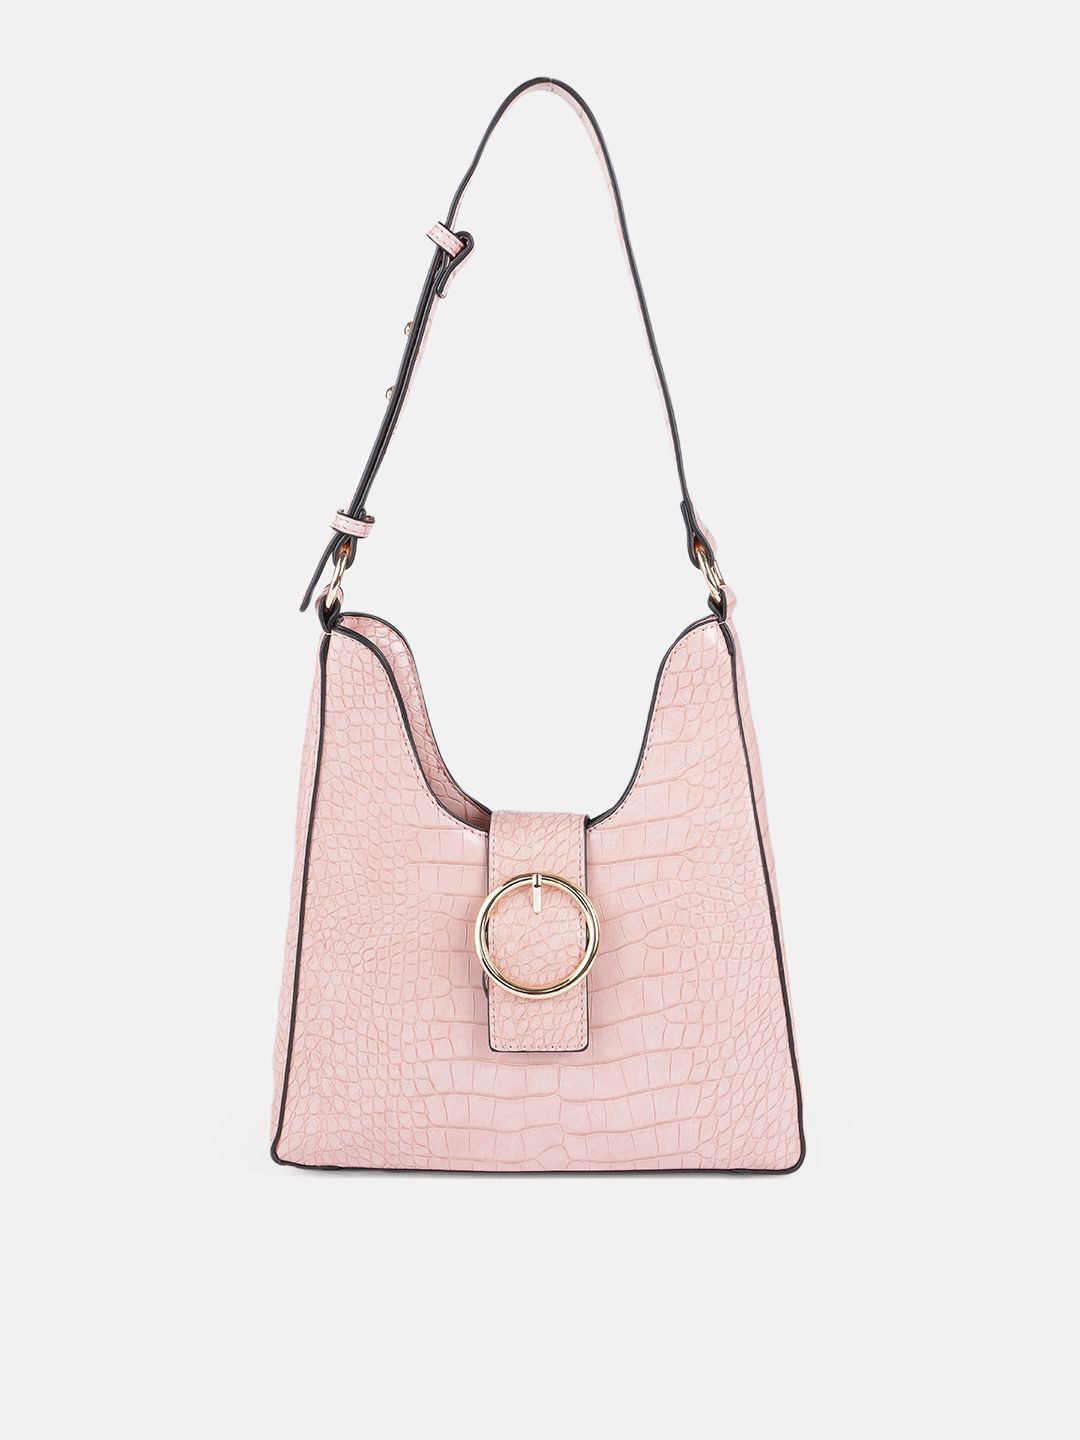 CORSICA Pink Animal Textured Structured Hobo Bag Price in India